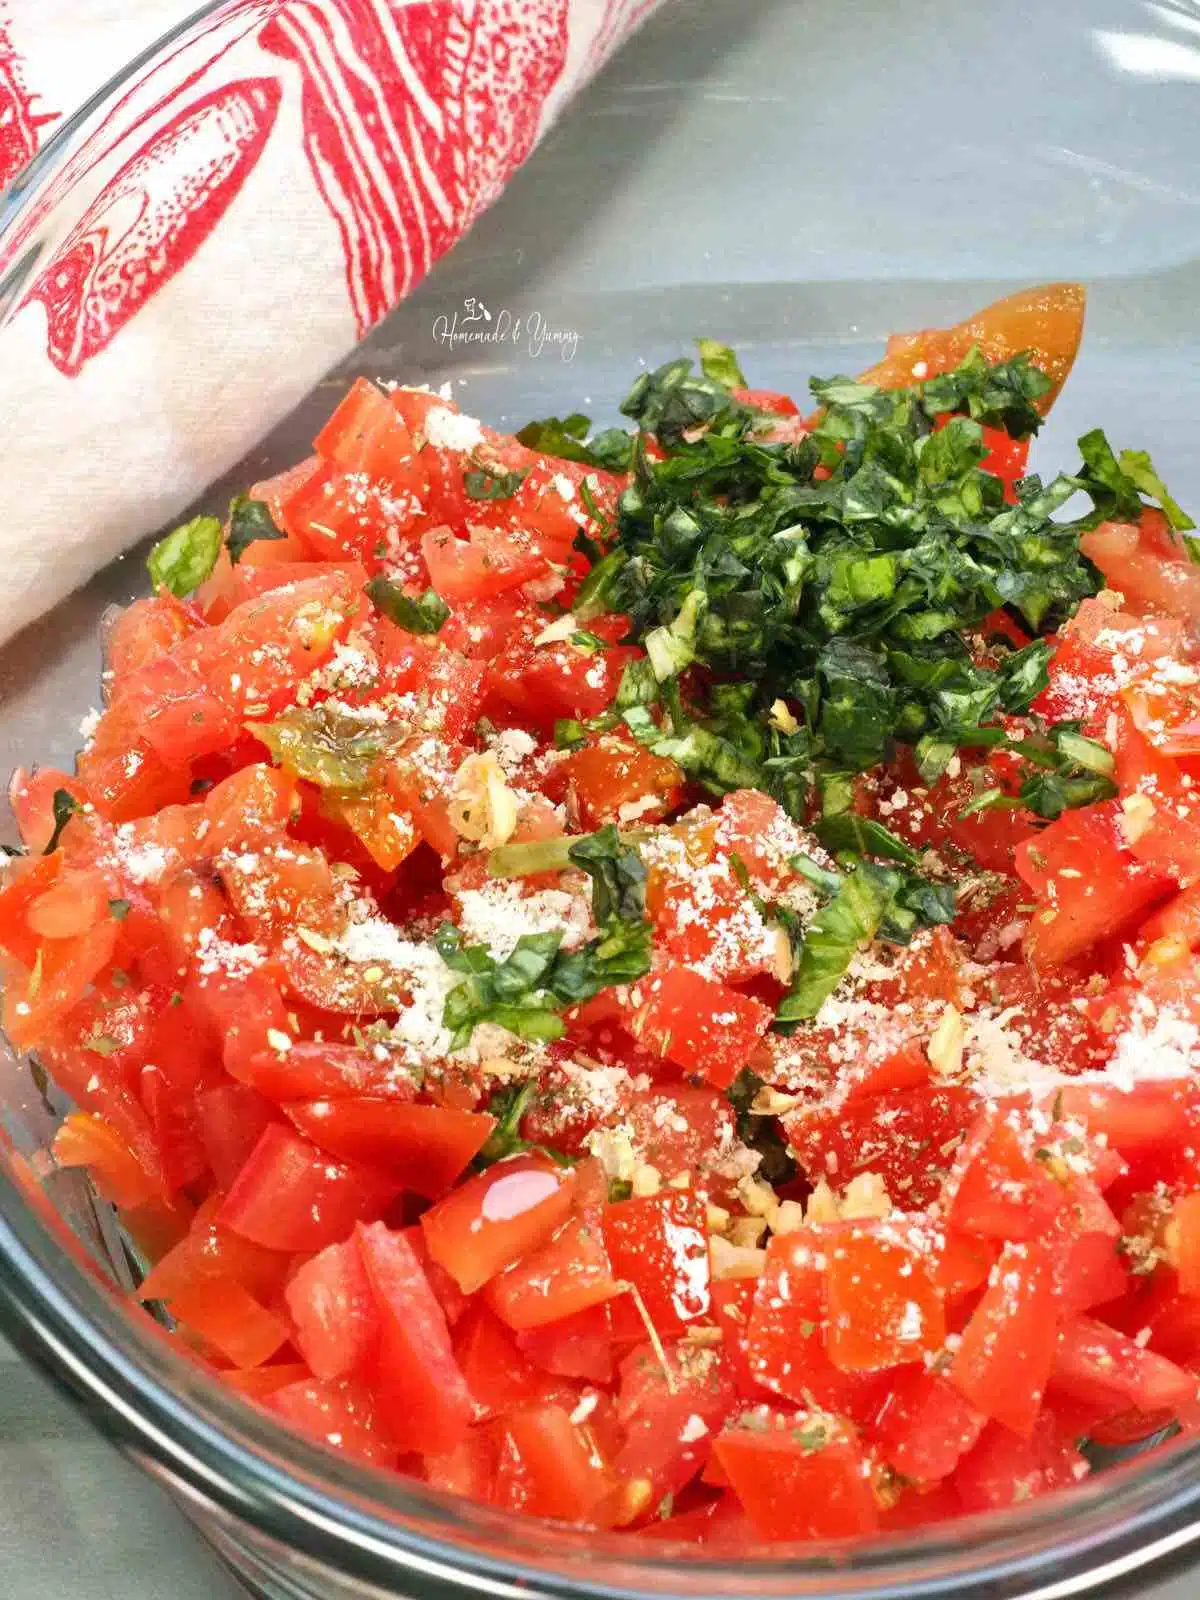 Bruschetta ingredients tossed in a bowl of diced tomatoes.